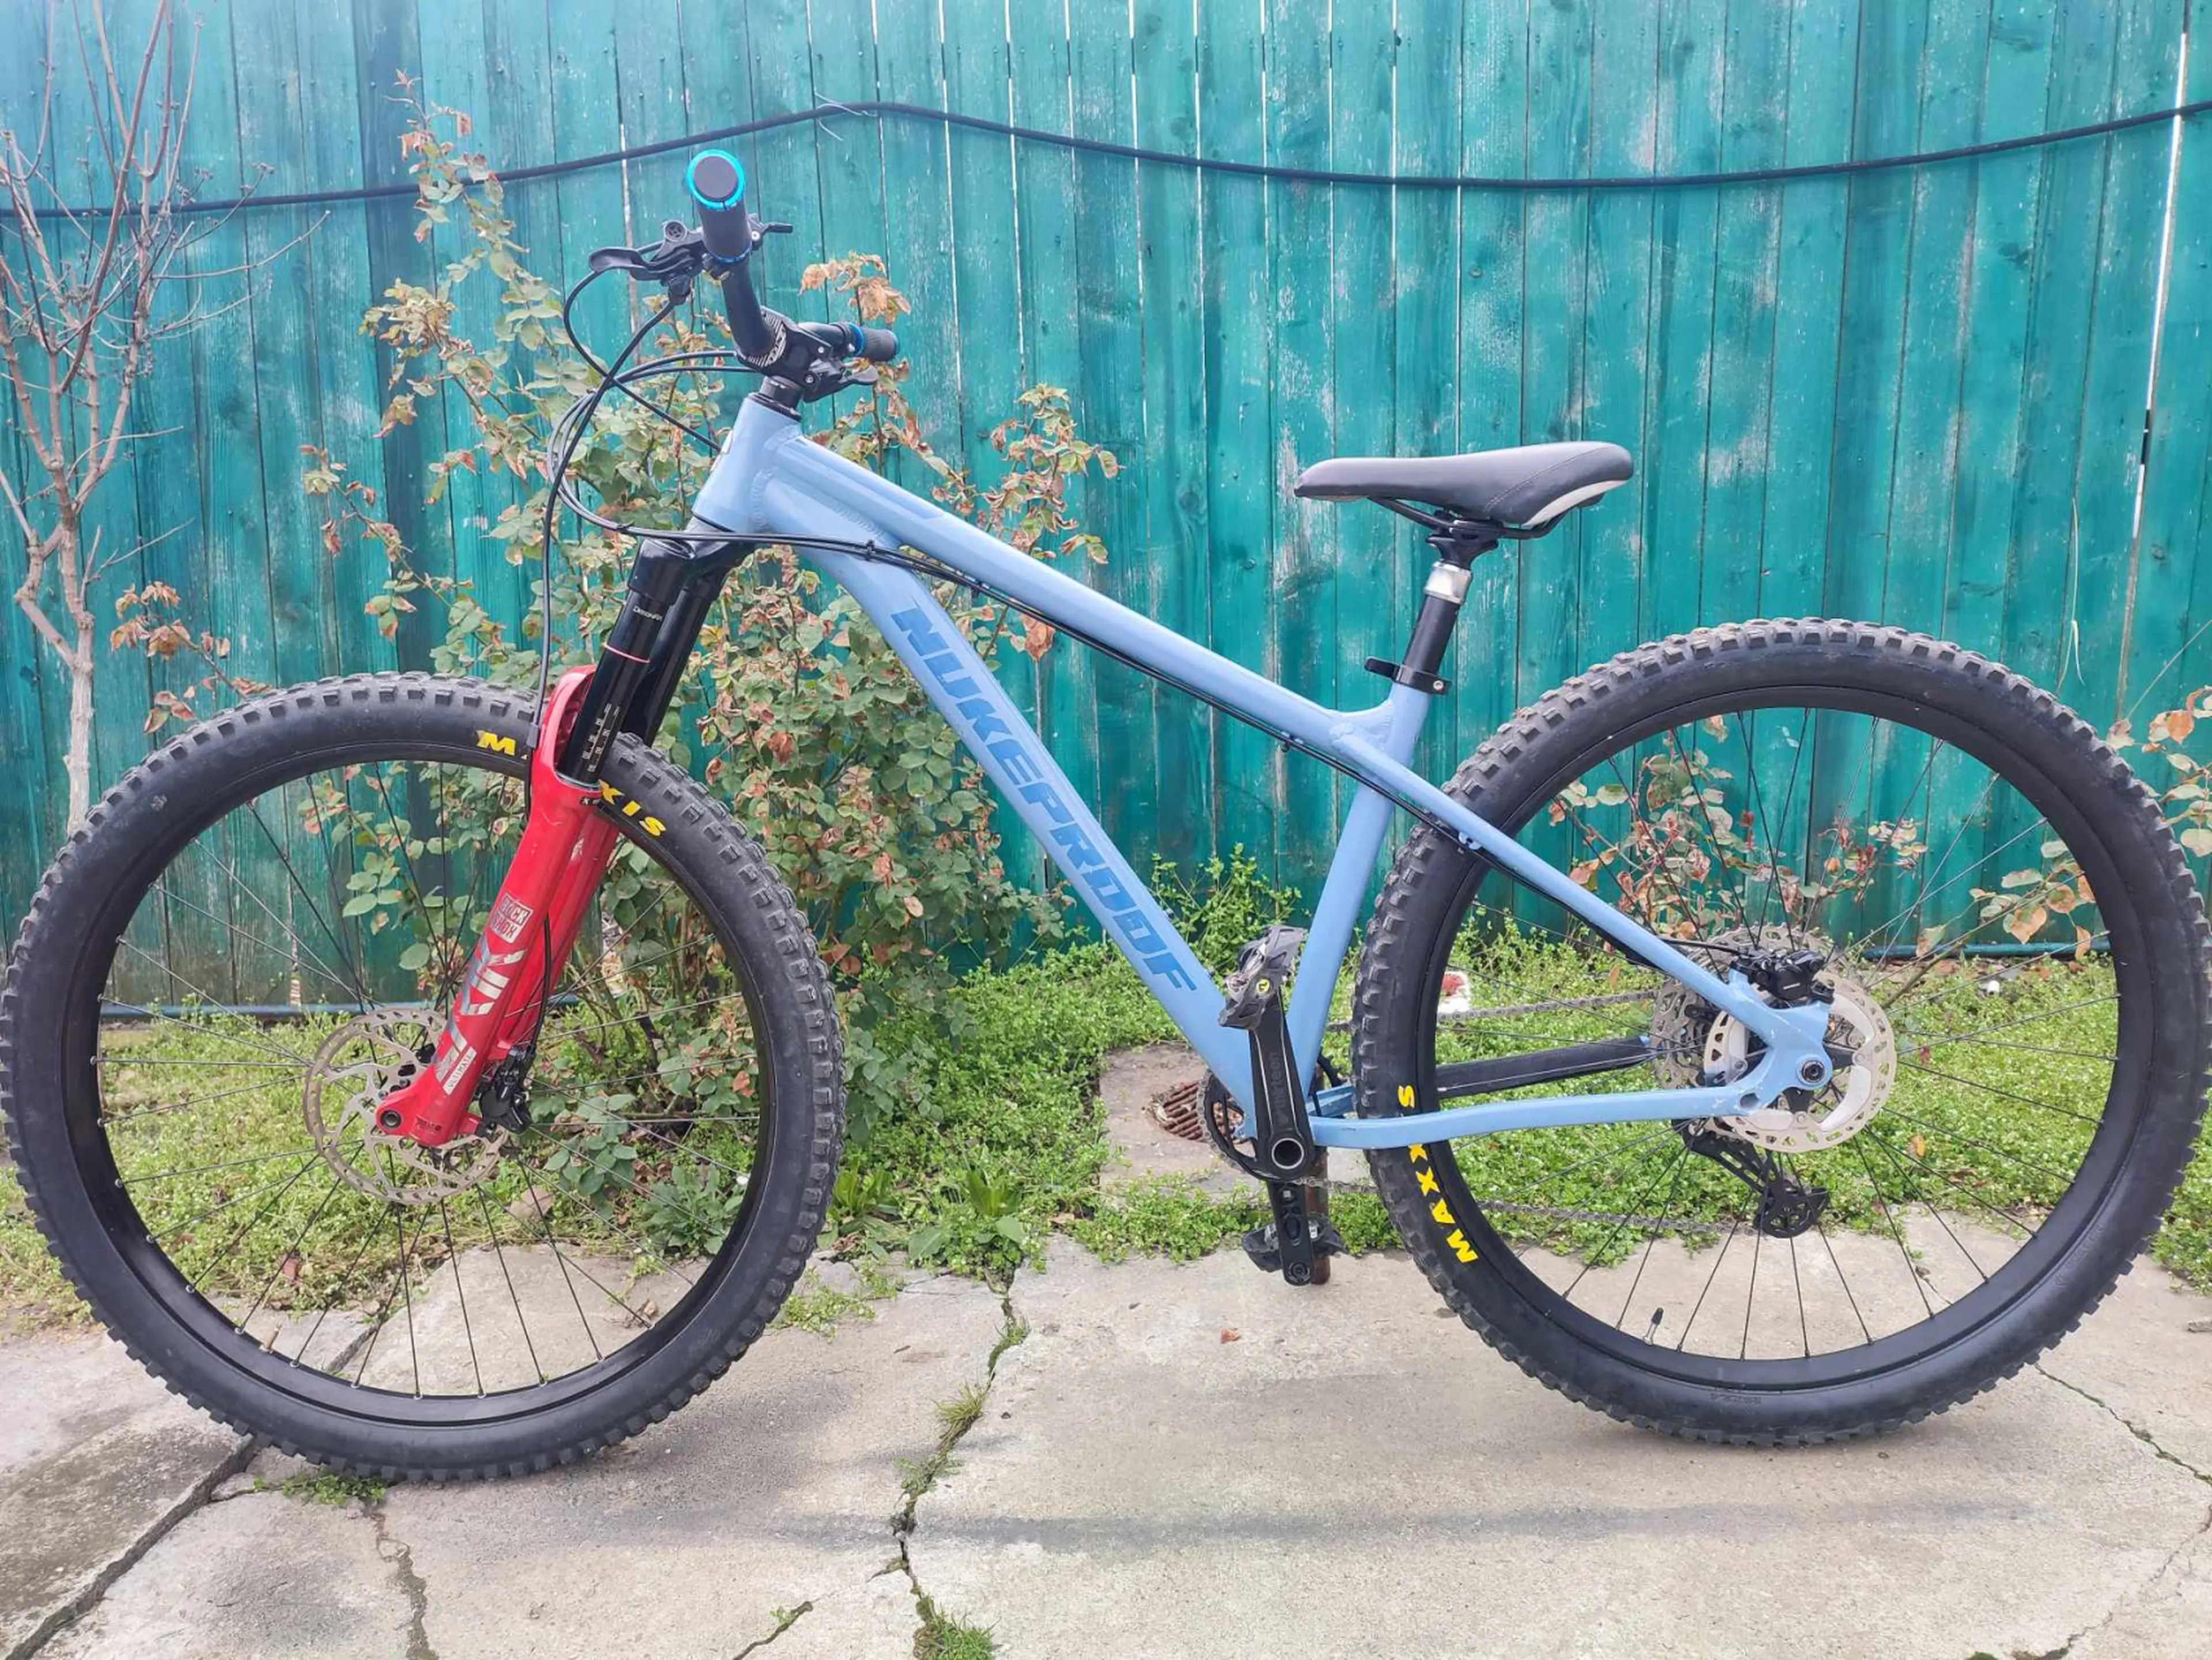 2. Nukeproof scout 290